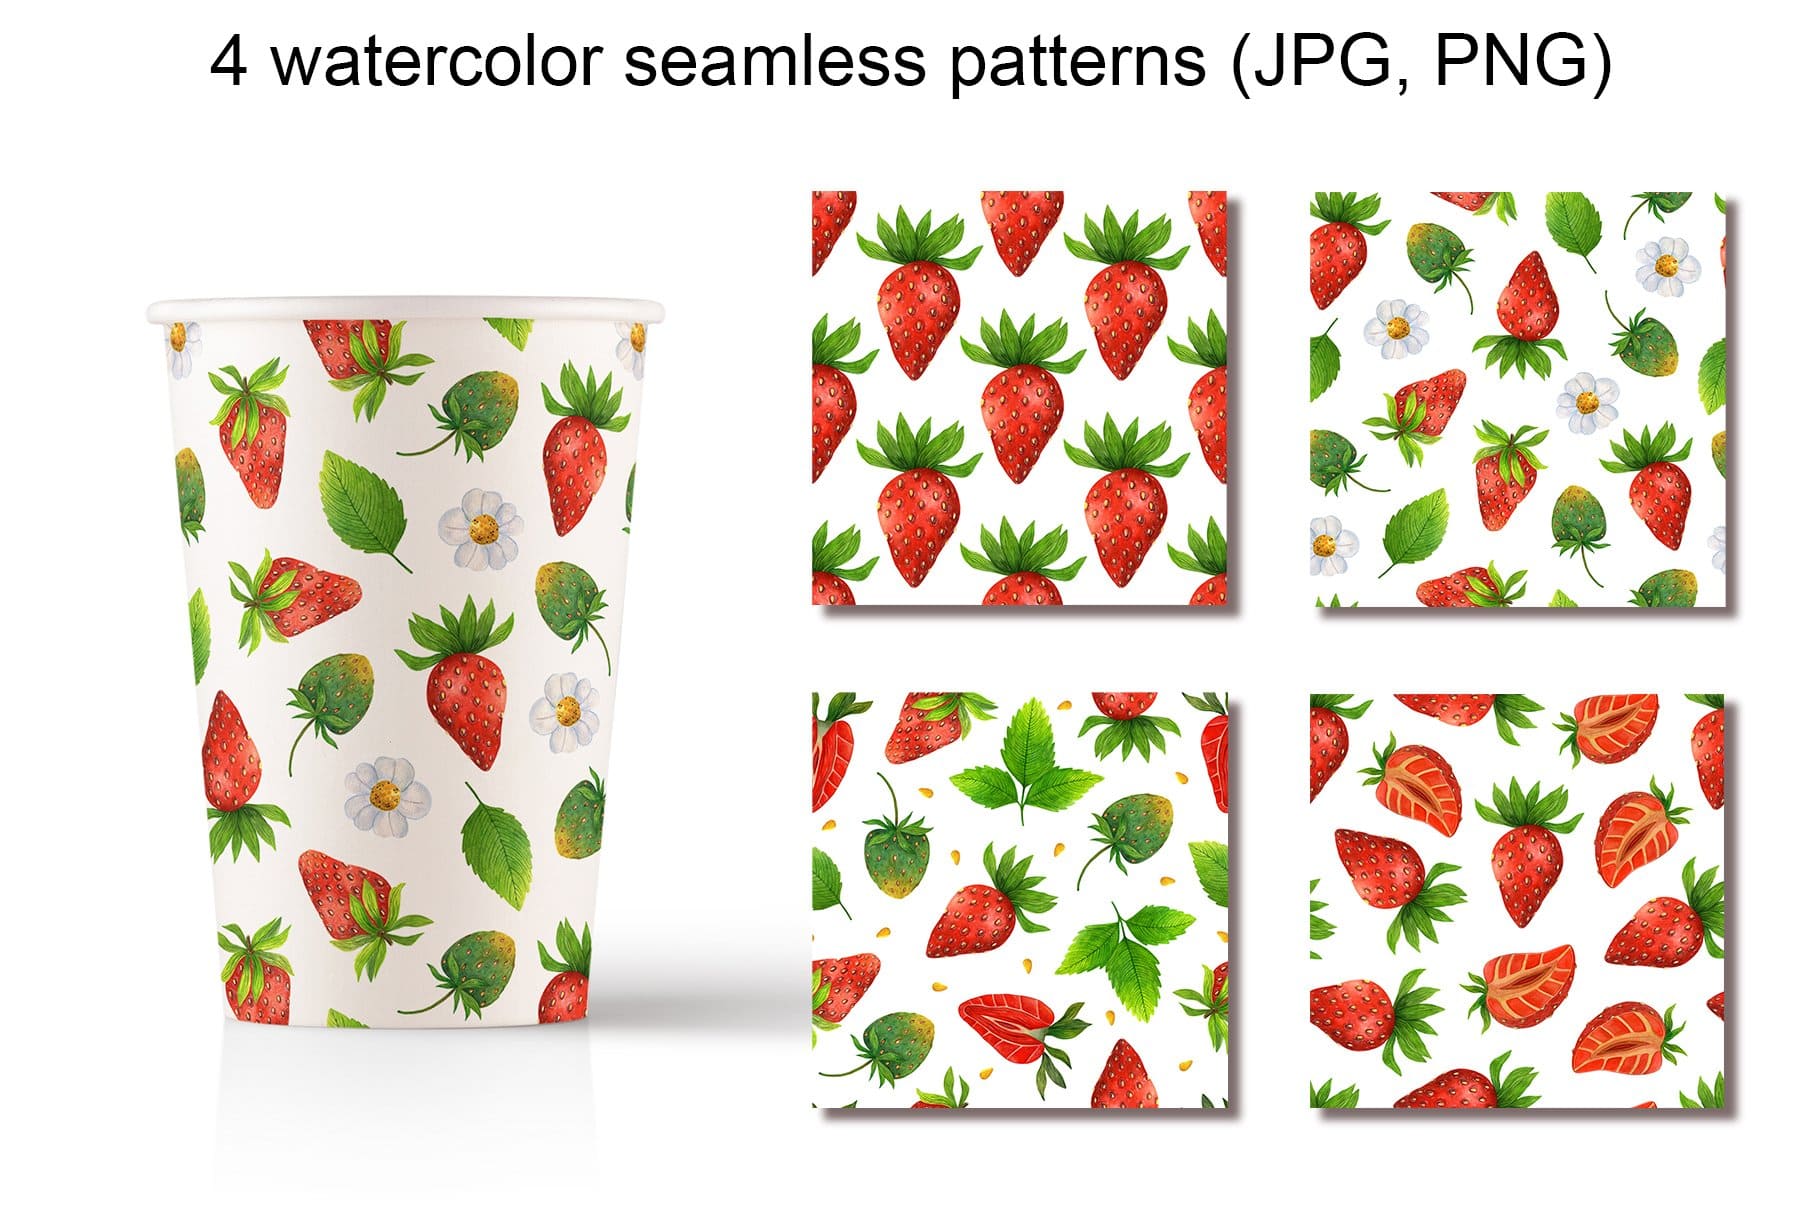 4 watercolor seanless patterns in JPG and PNG formats.